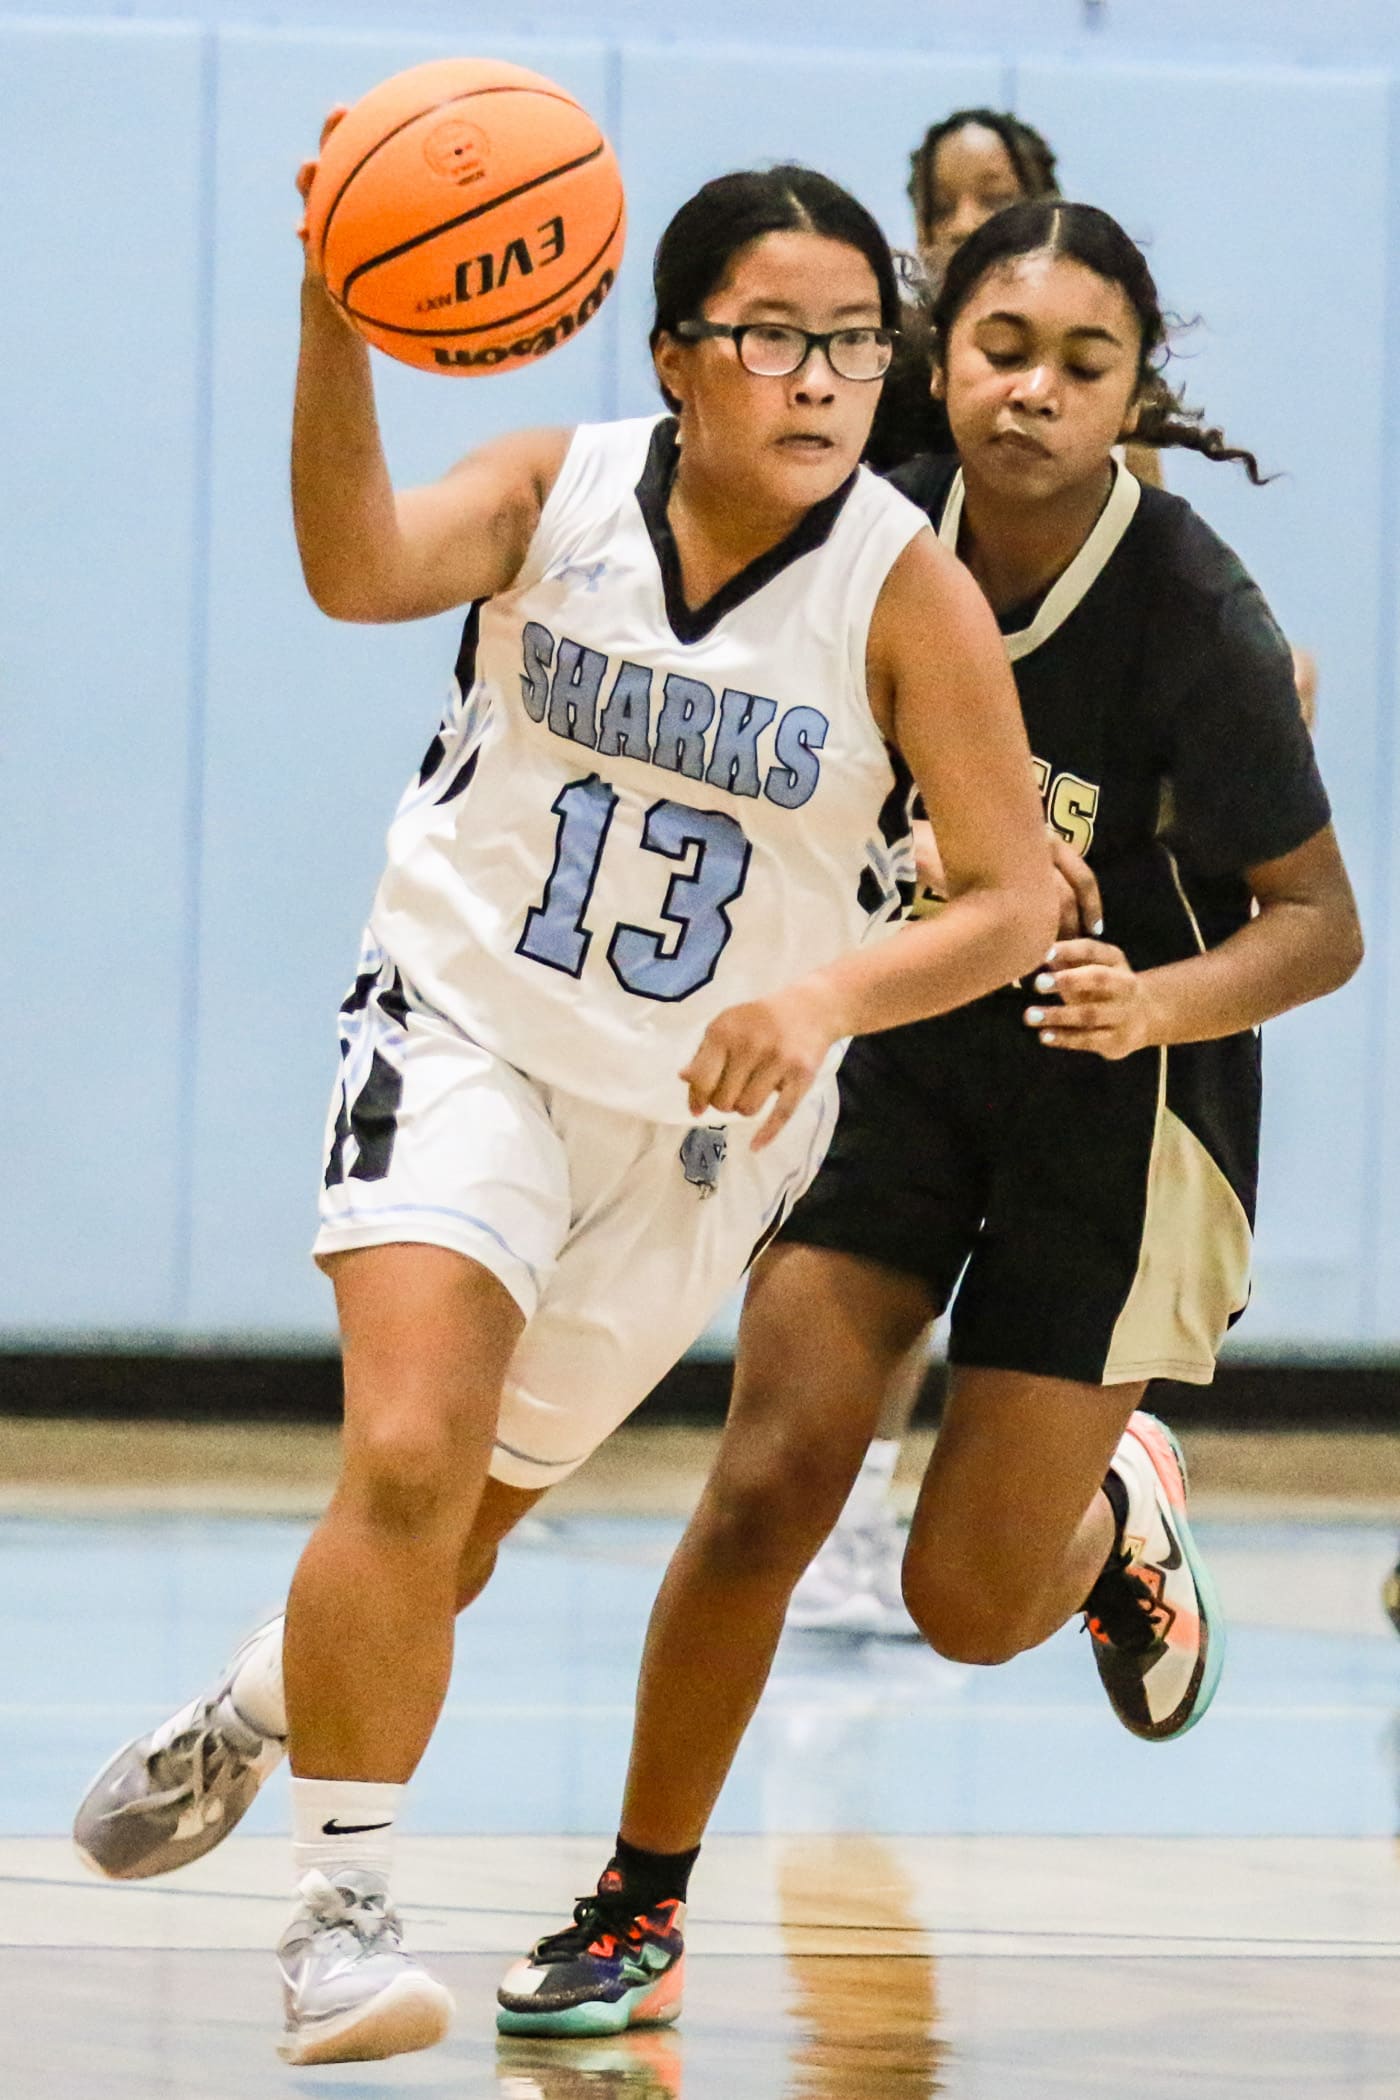 Shark 13 Jr Hannah Sciortino moves down the court against Citrus 11/15/22 at NCT. Photo by Cheryl Clanton.